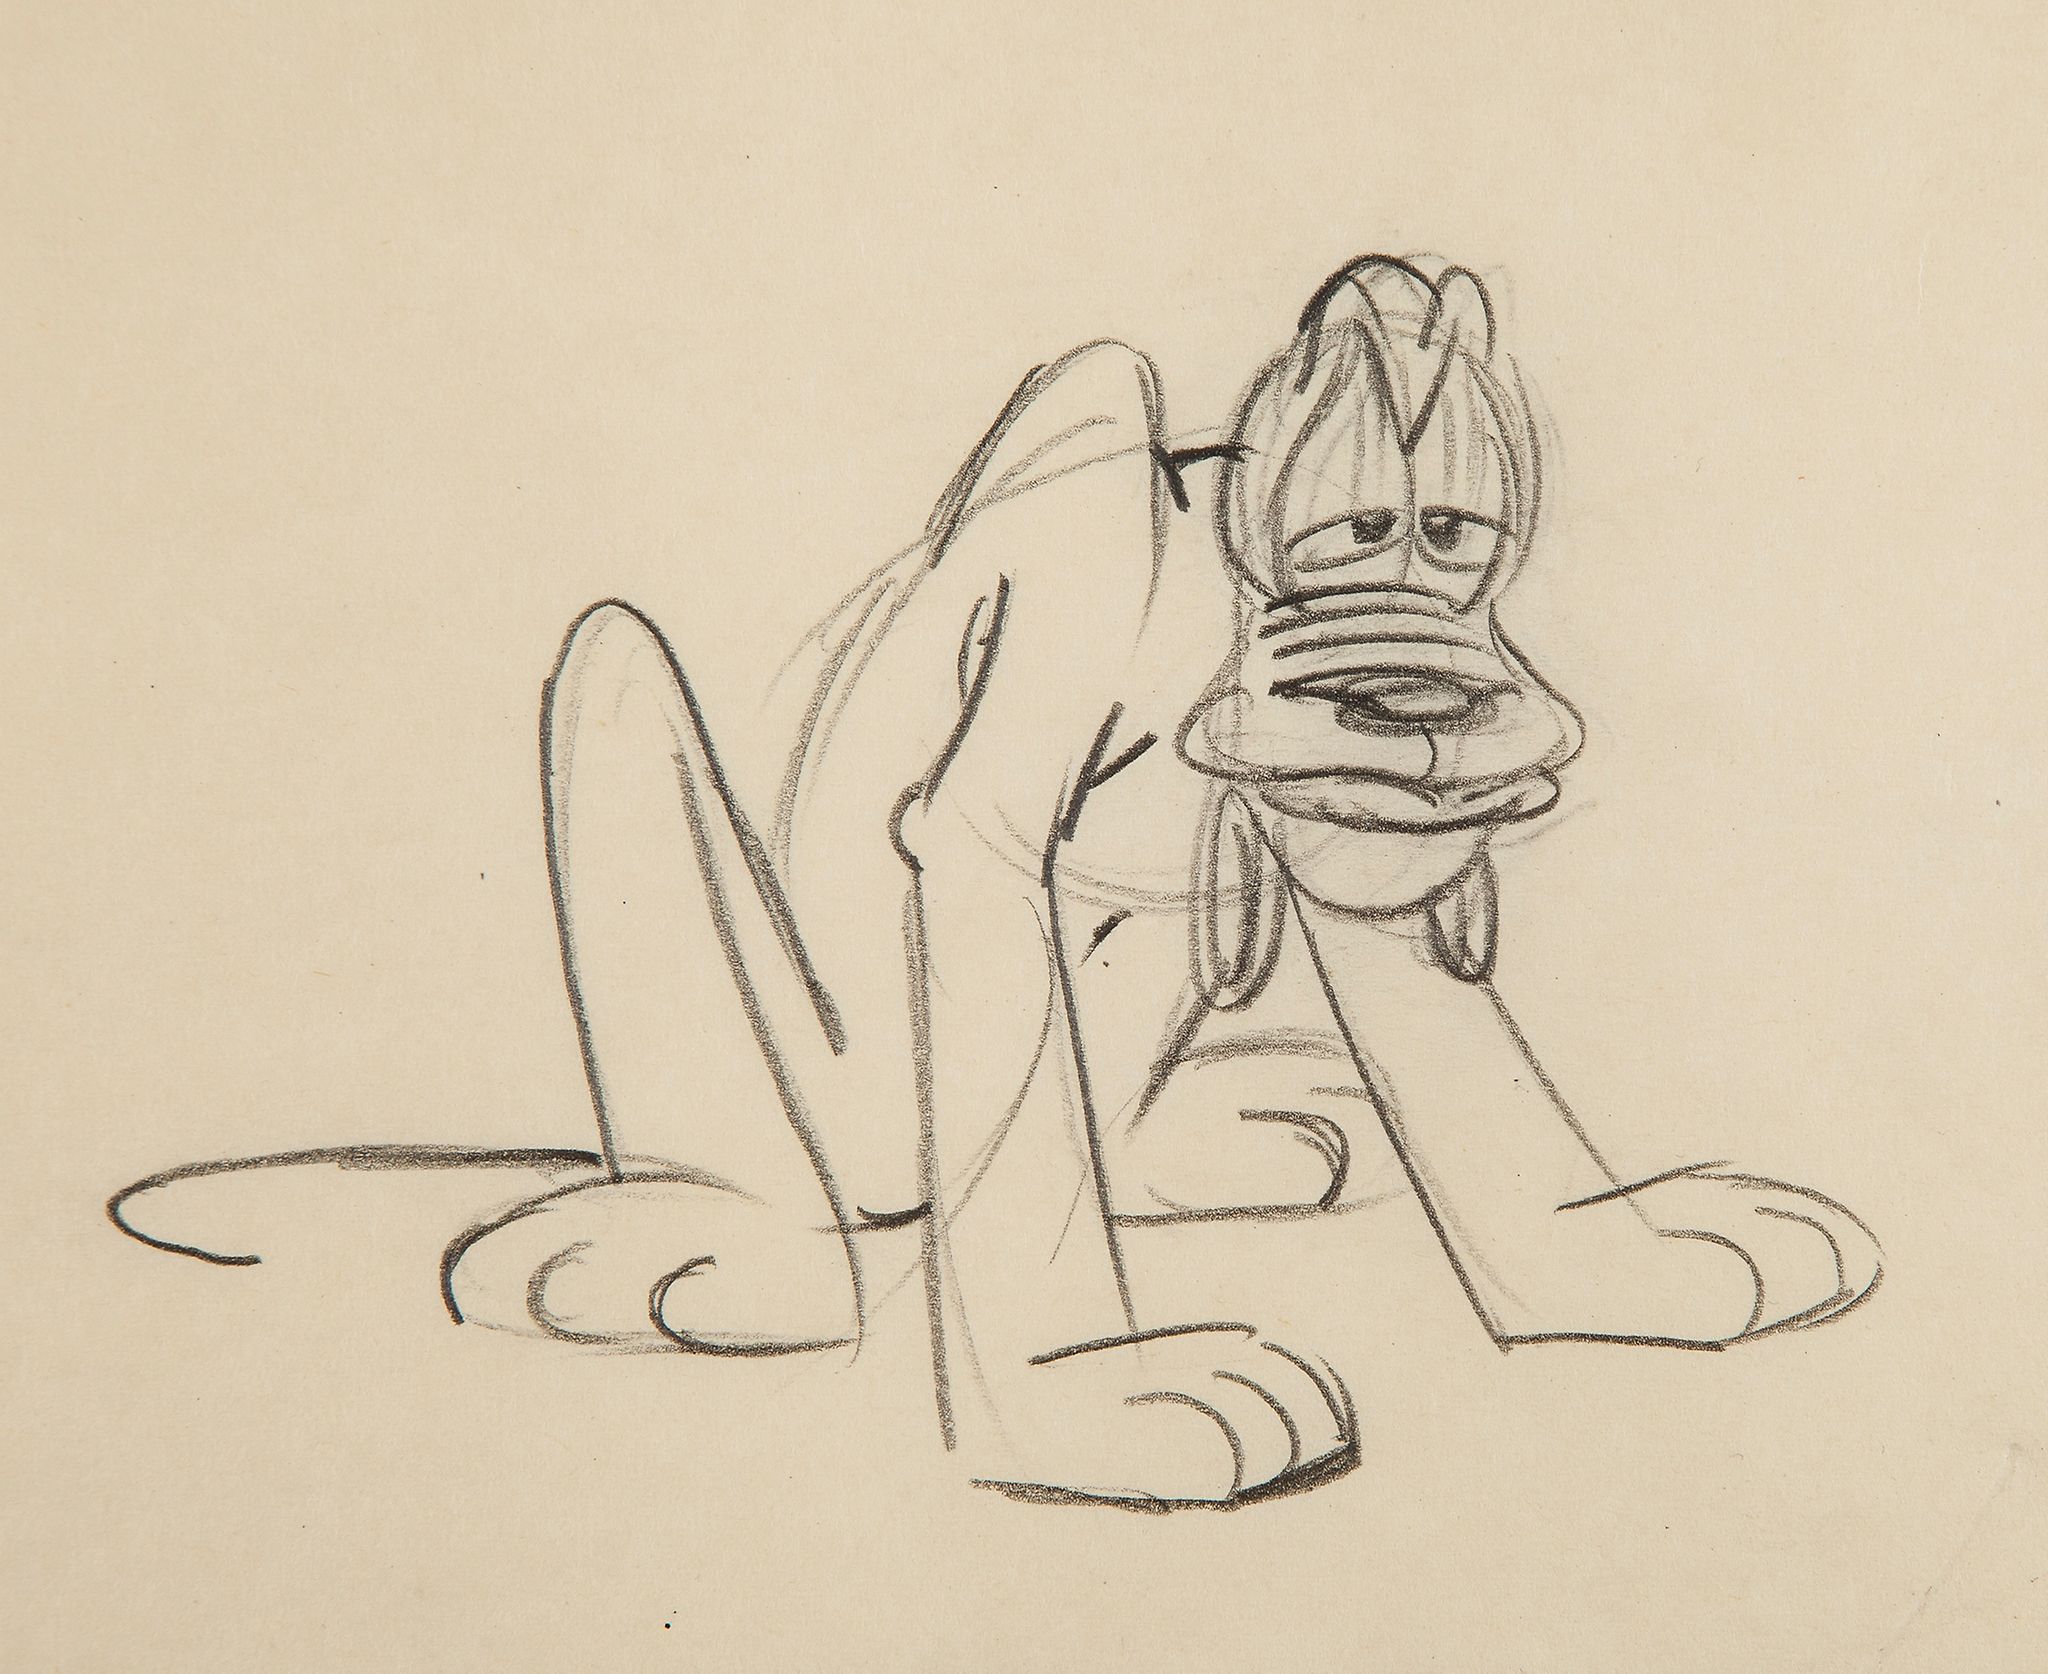 Caricatures and cartoons.- - Wile E. Coyote & Road Runner,  together with original pencil sketch/ - Image 3 of 3